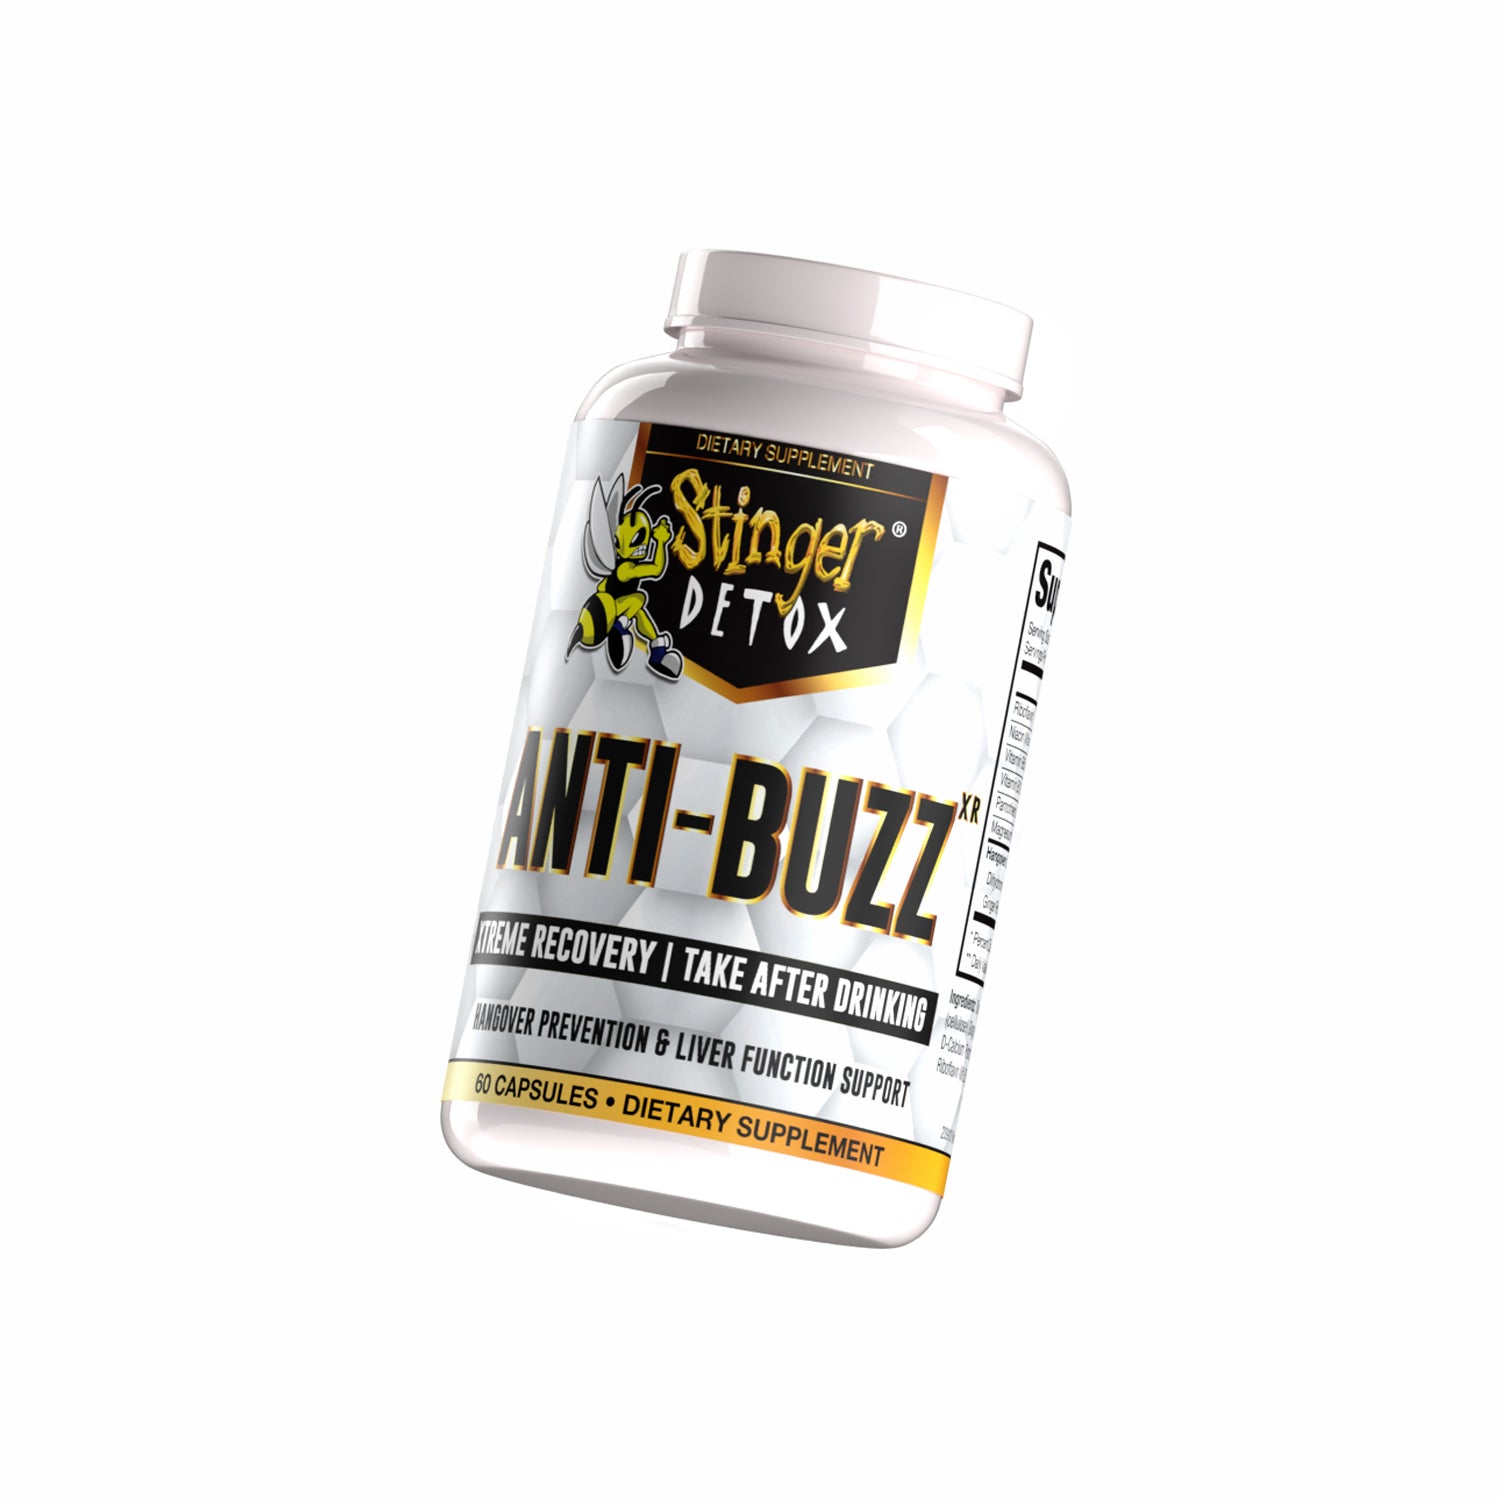 Anti-Buzz | Hangover Prevention & Liver Support